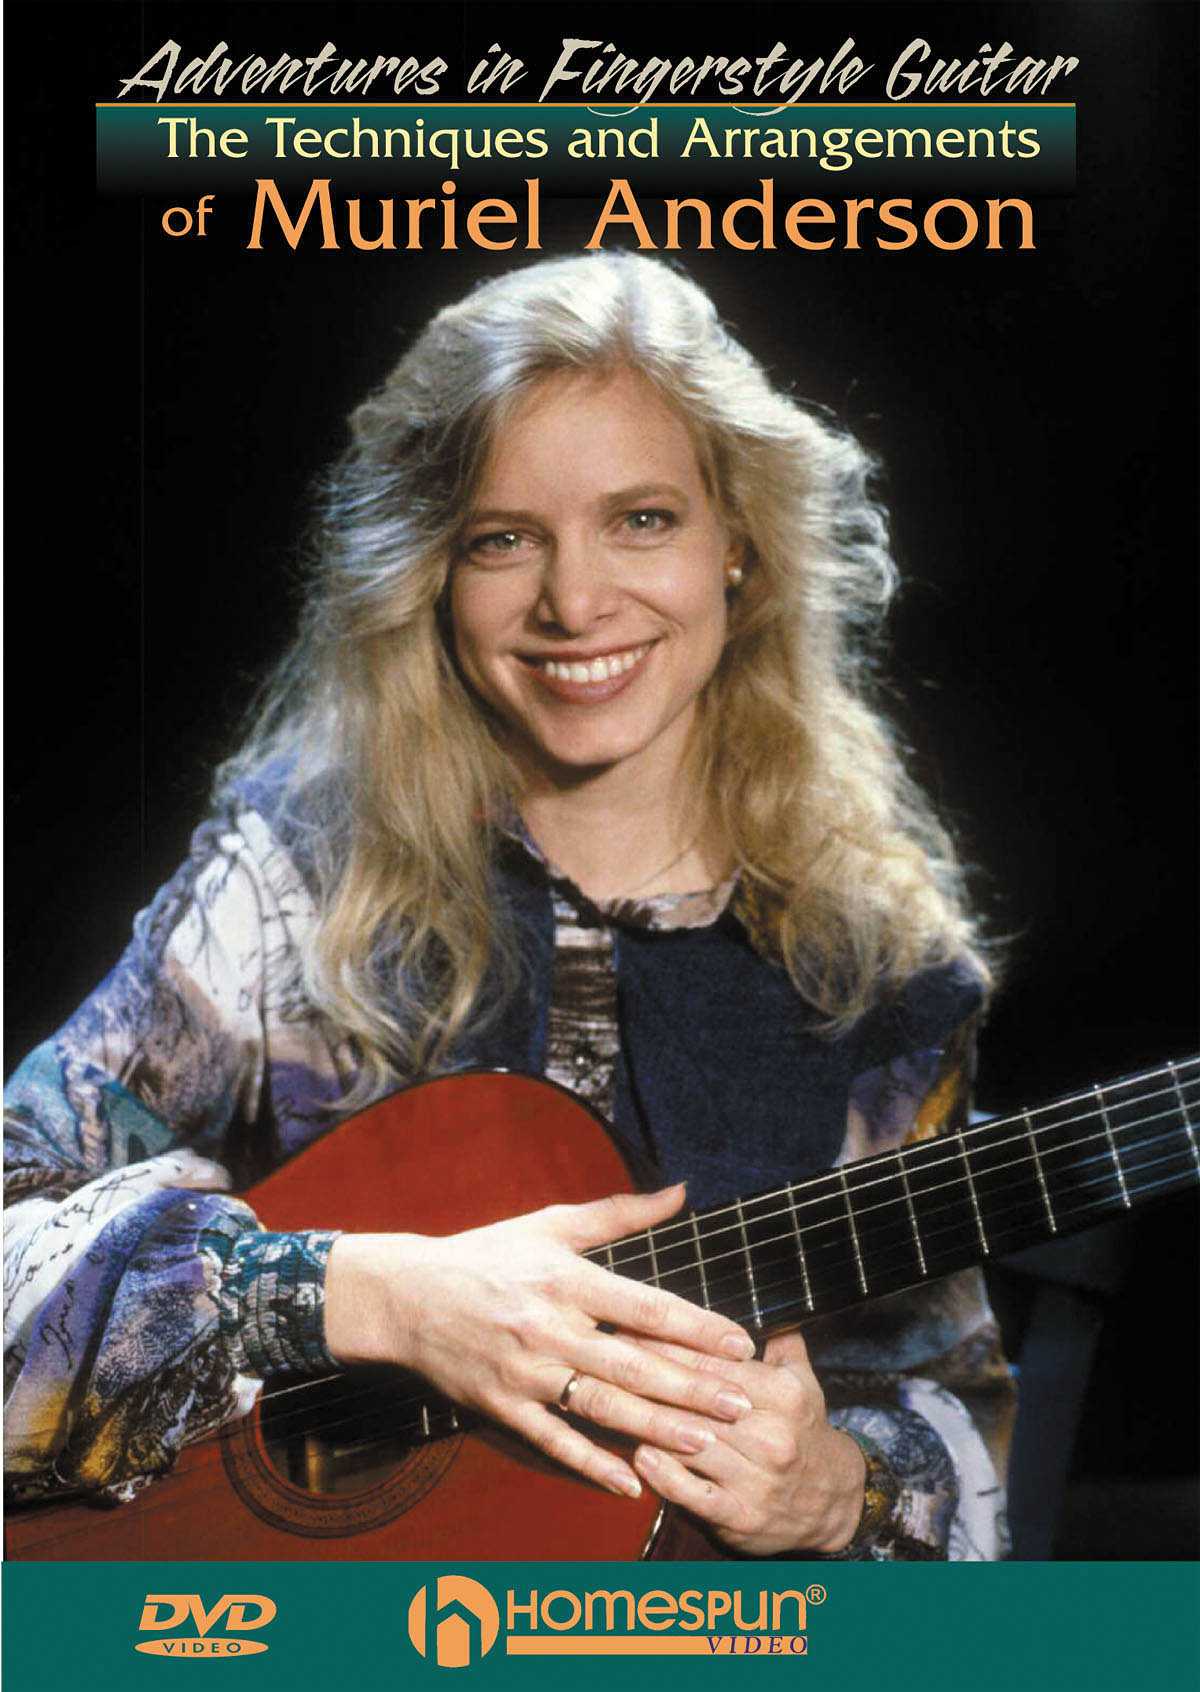 Image 1 of DVD - Adventures in Fingerstyle Guitar-The Techniques and Arrangements of Muriel Anderson - SKU# 300-DVD279 : Product Type Media : Elderly Instruments